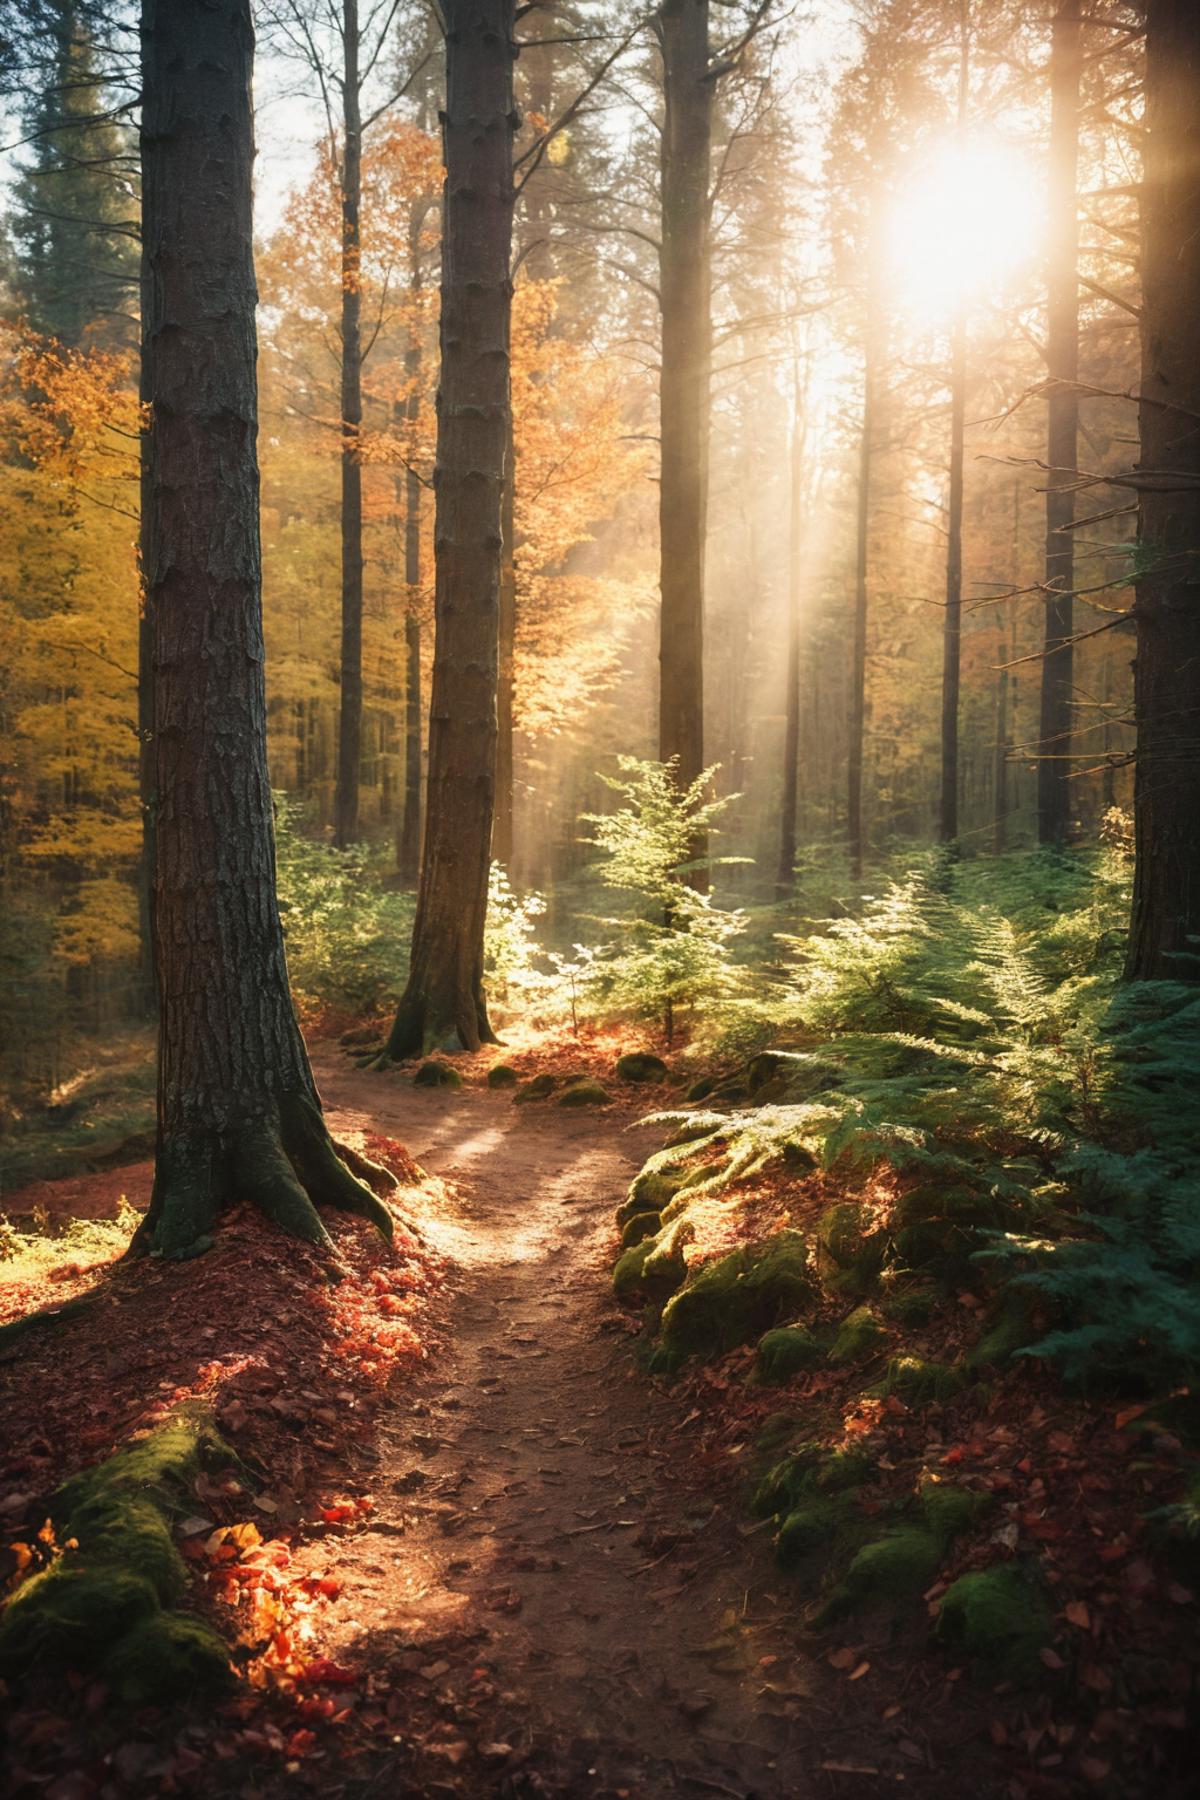 A Sunlit Path Through A Forest With Trees And Ferns